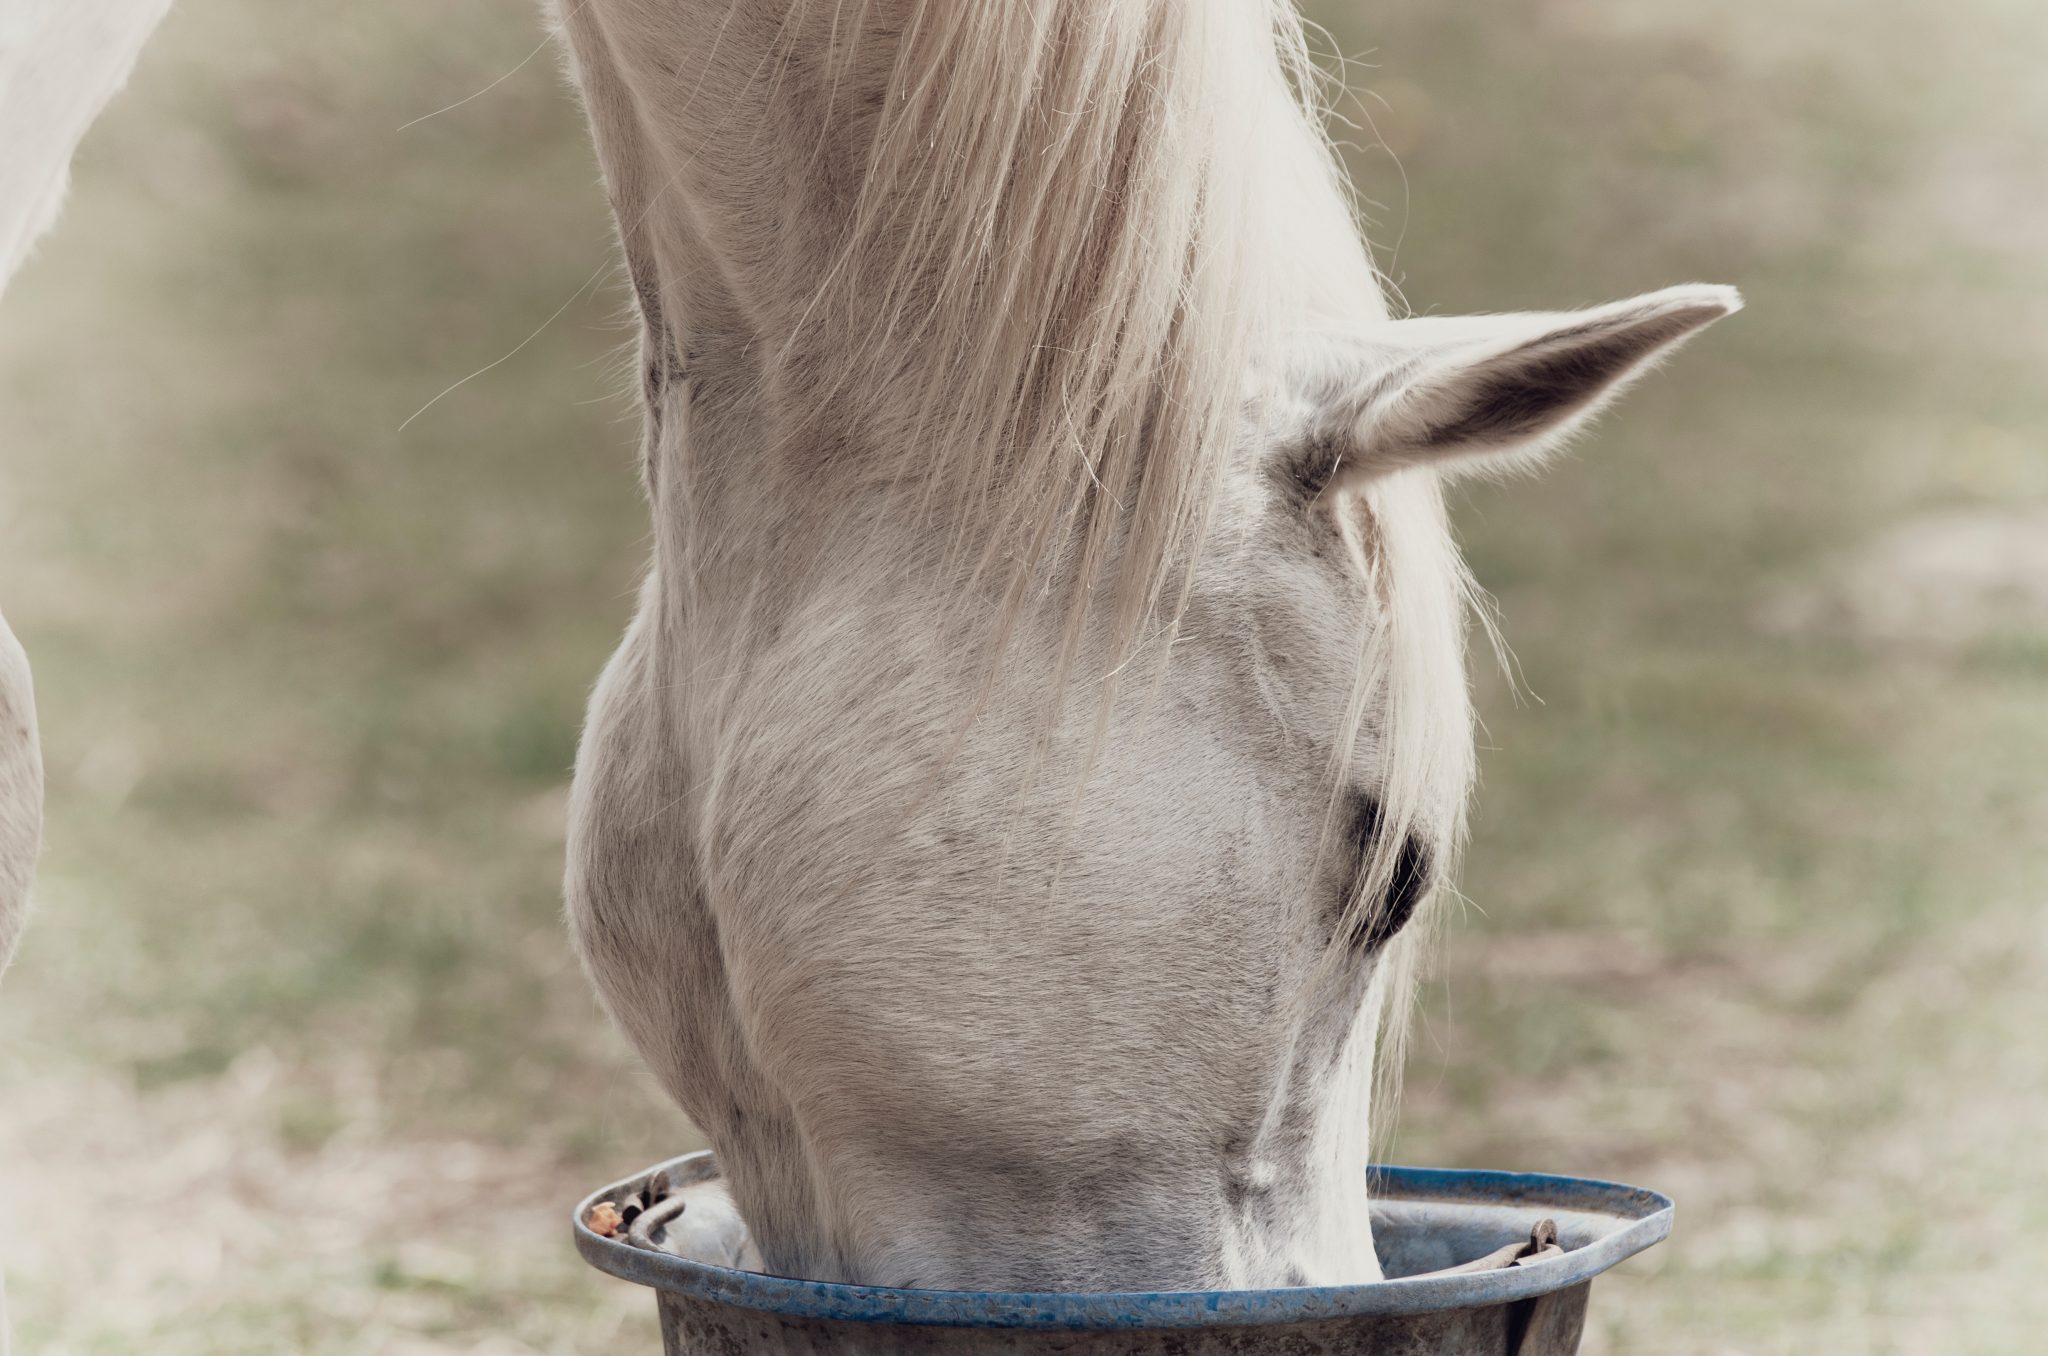 White horse eating a meal from a bucket